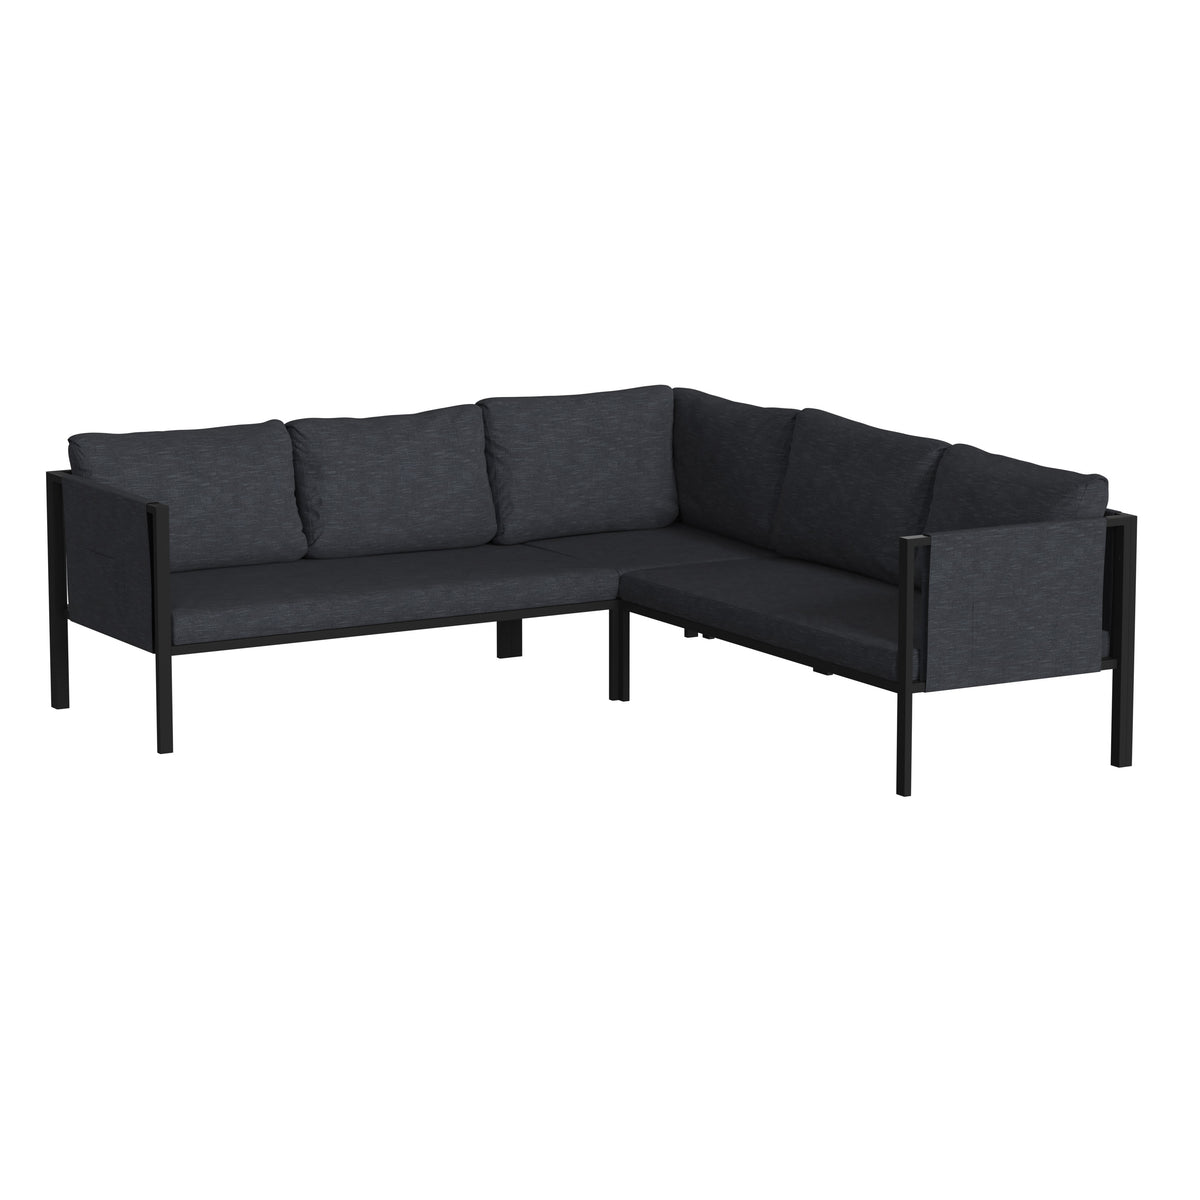 Charcoal |#| Black Steel Frame Sectional with Included Charcoal Cushions and Storage Pockets